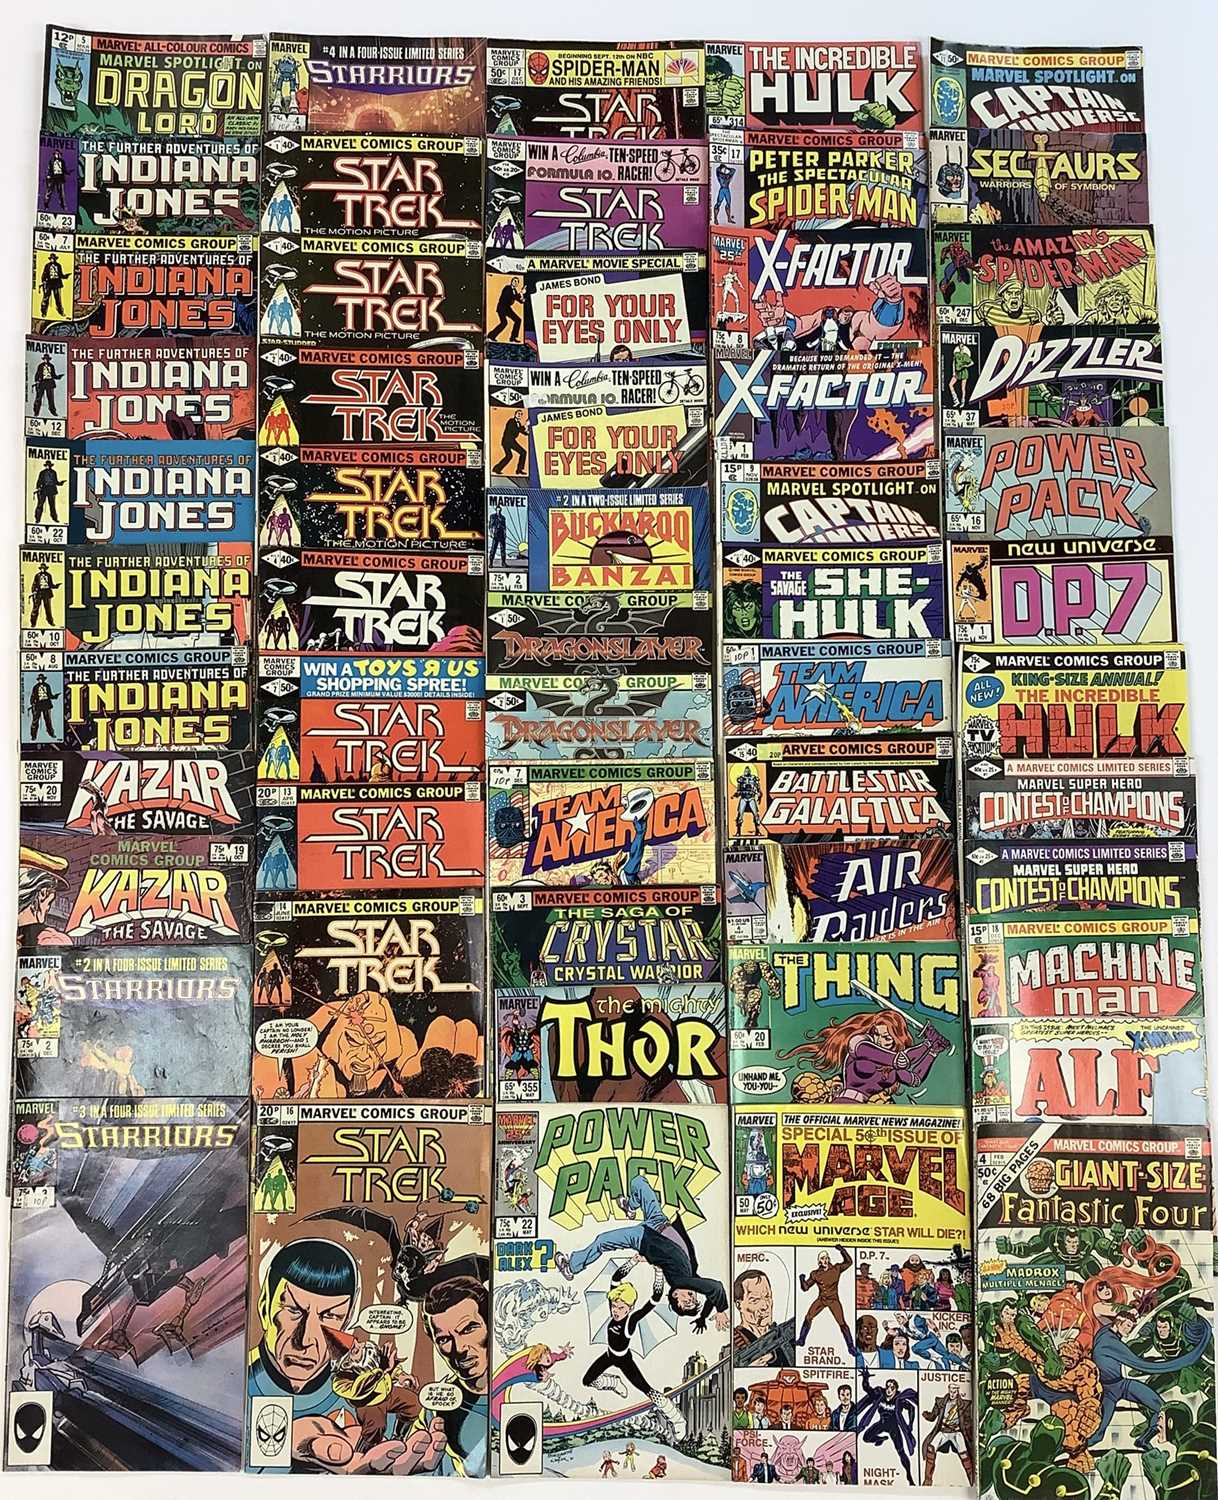 Lot 226 - Large box of marvel comics, mostly 1980's. To include The new defenders, Excalibur, Rom, Star Trek, silver surfer, Alpha Flight and others. Approximately 185 comics.